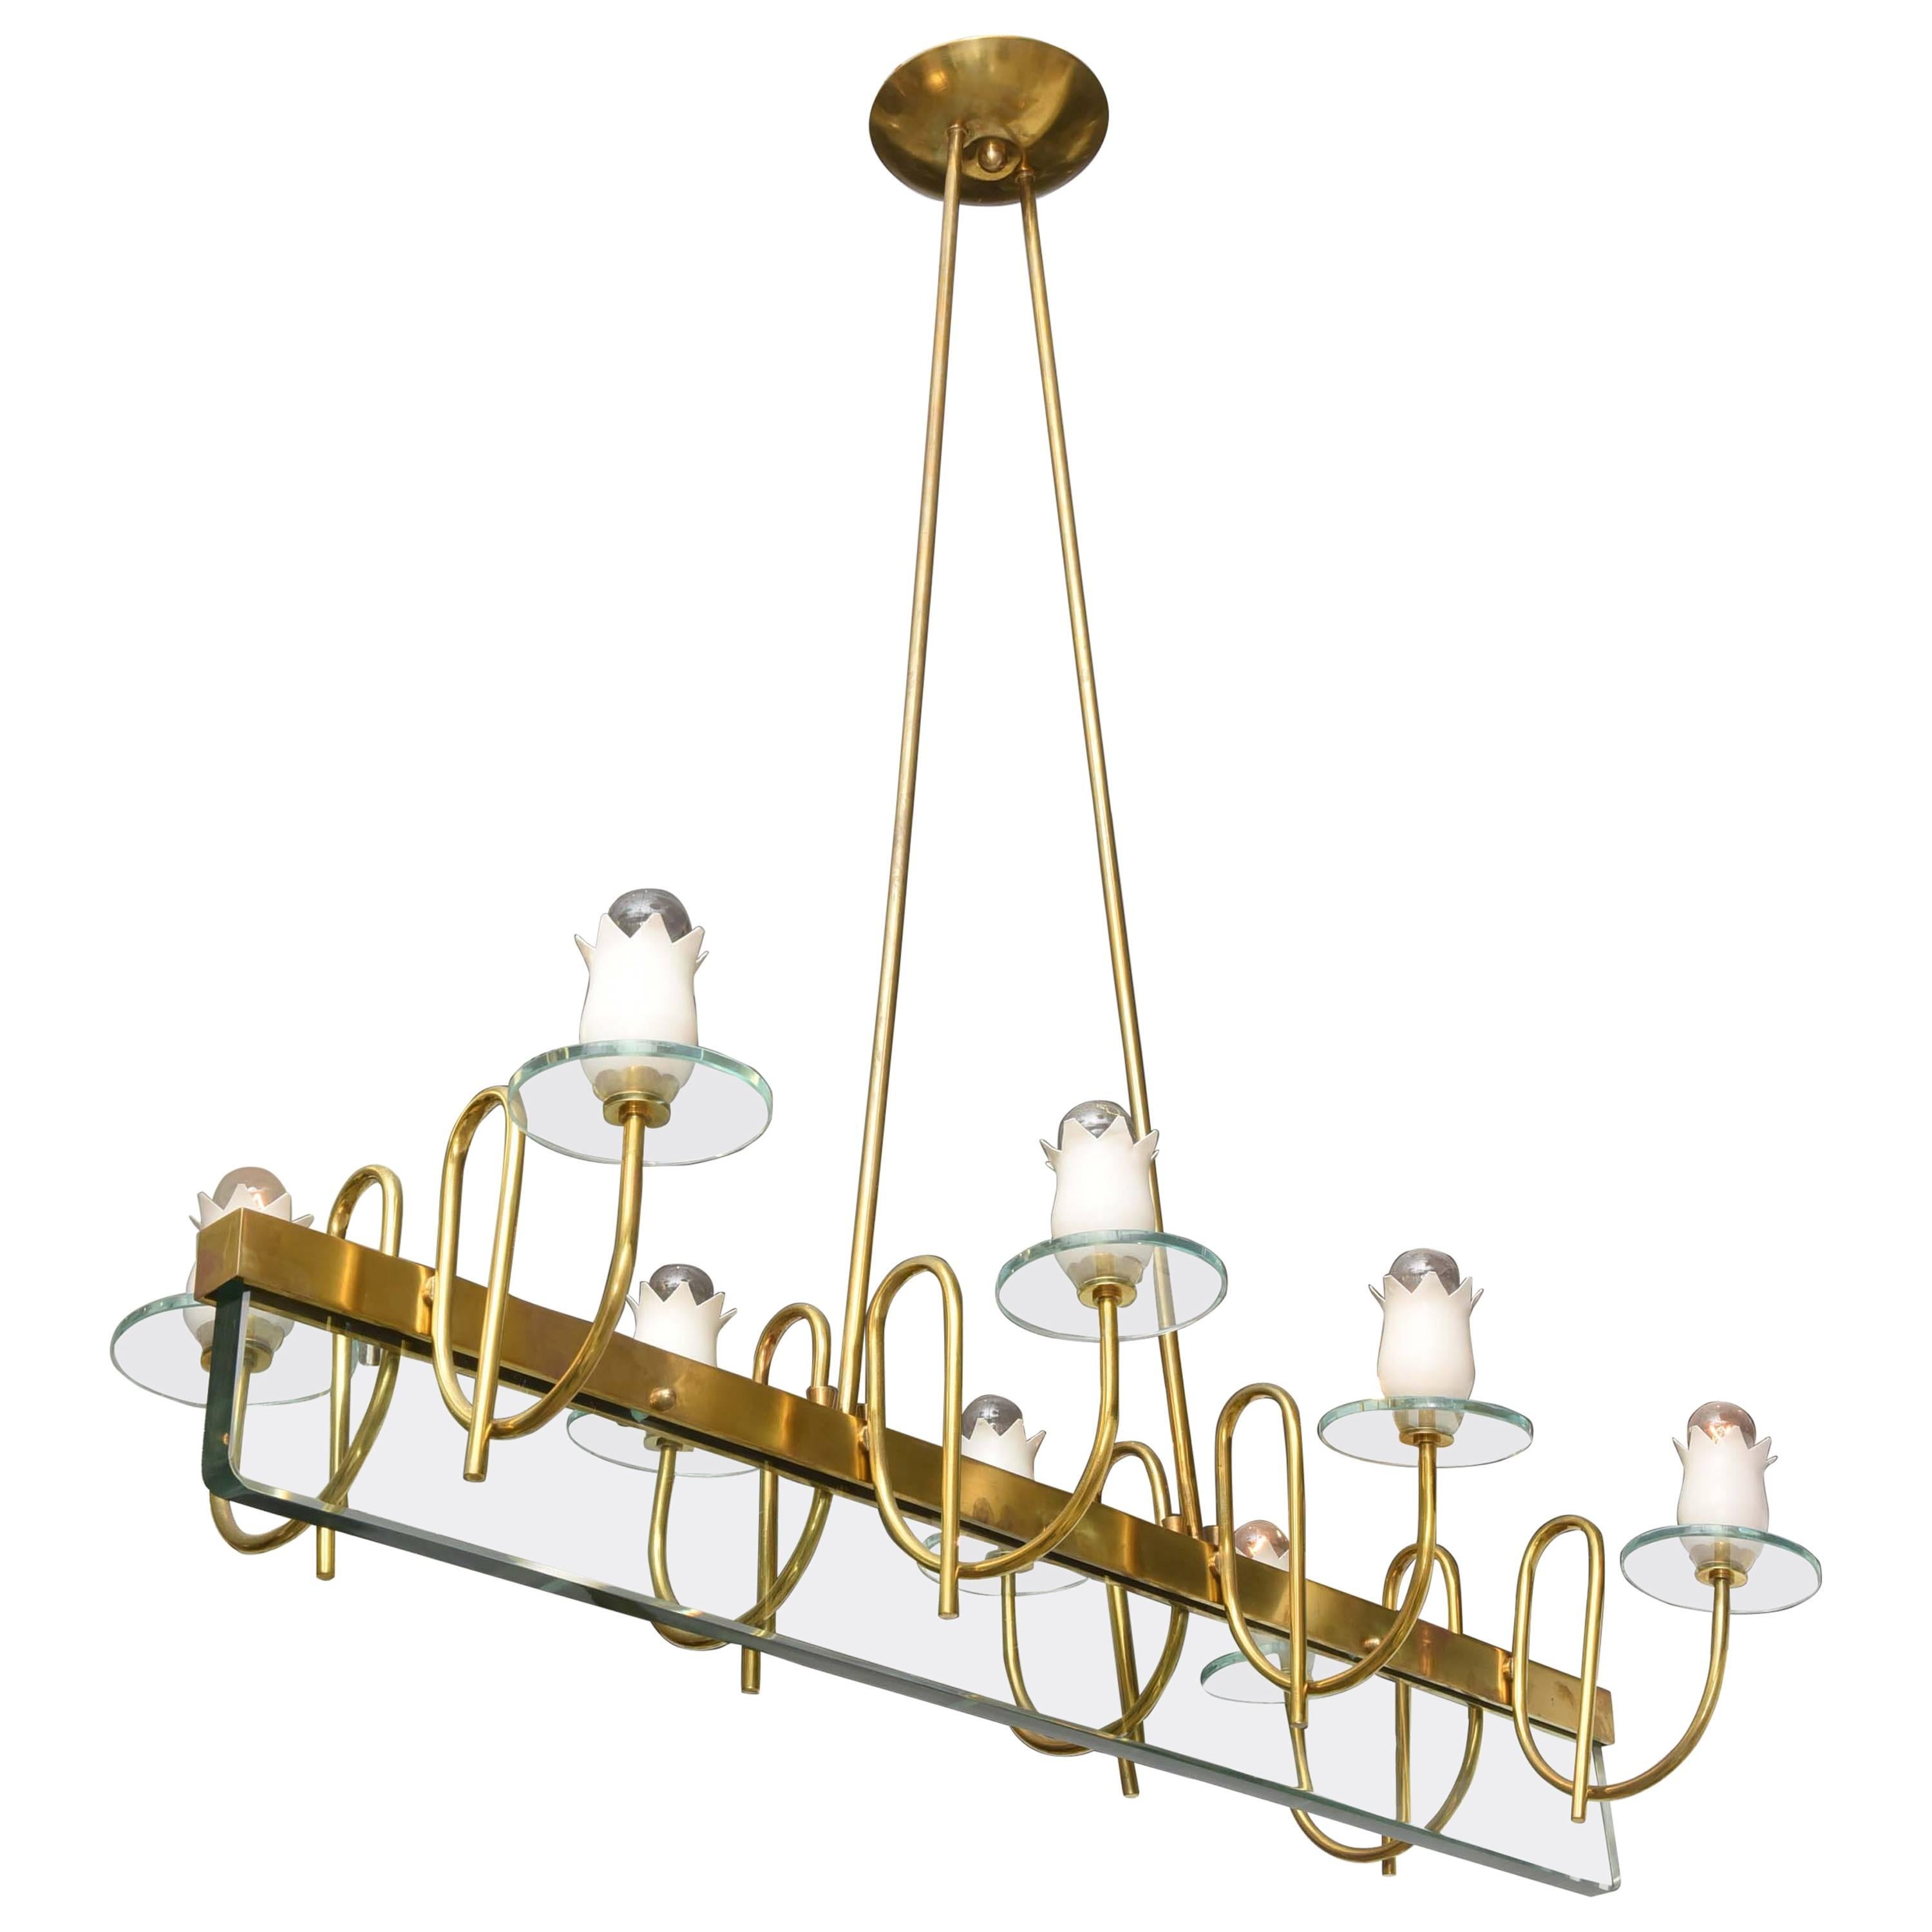 Brass and Glass Floral Chandelier in the Style of Fontana Arte